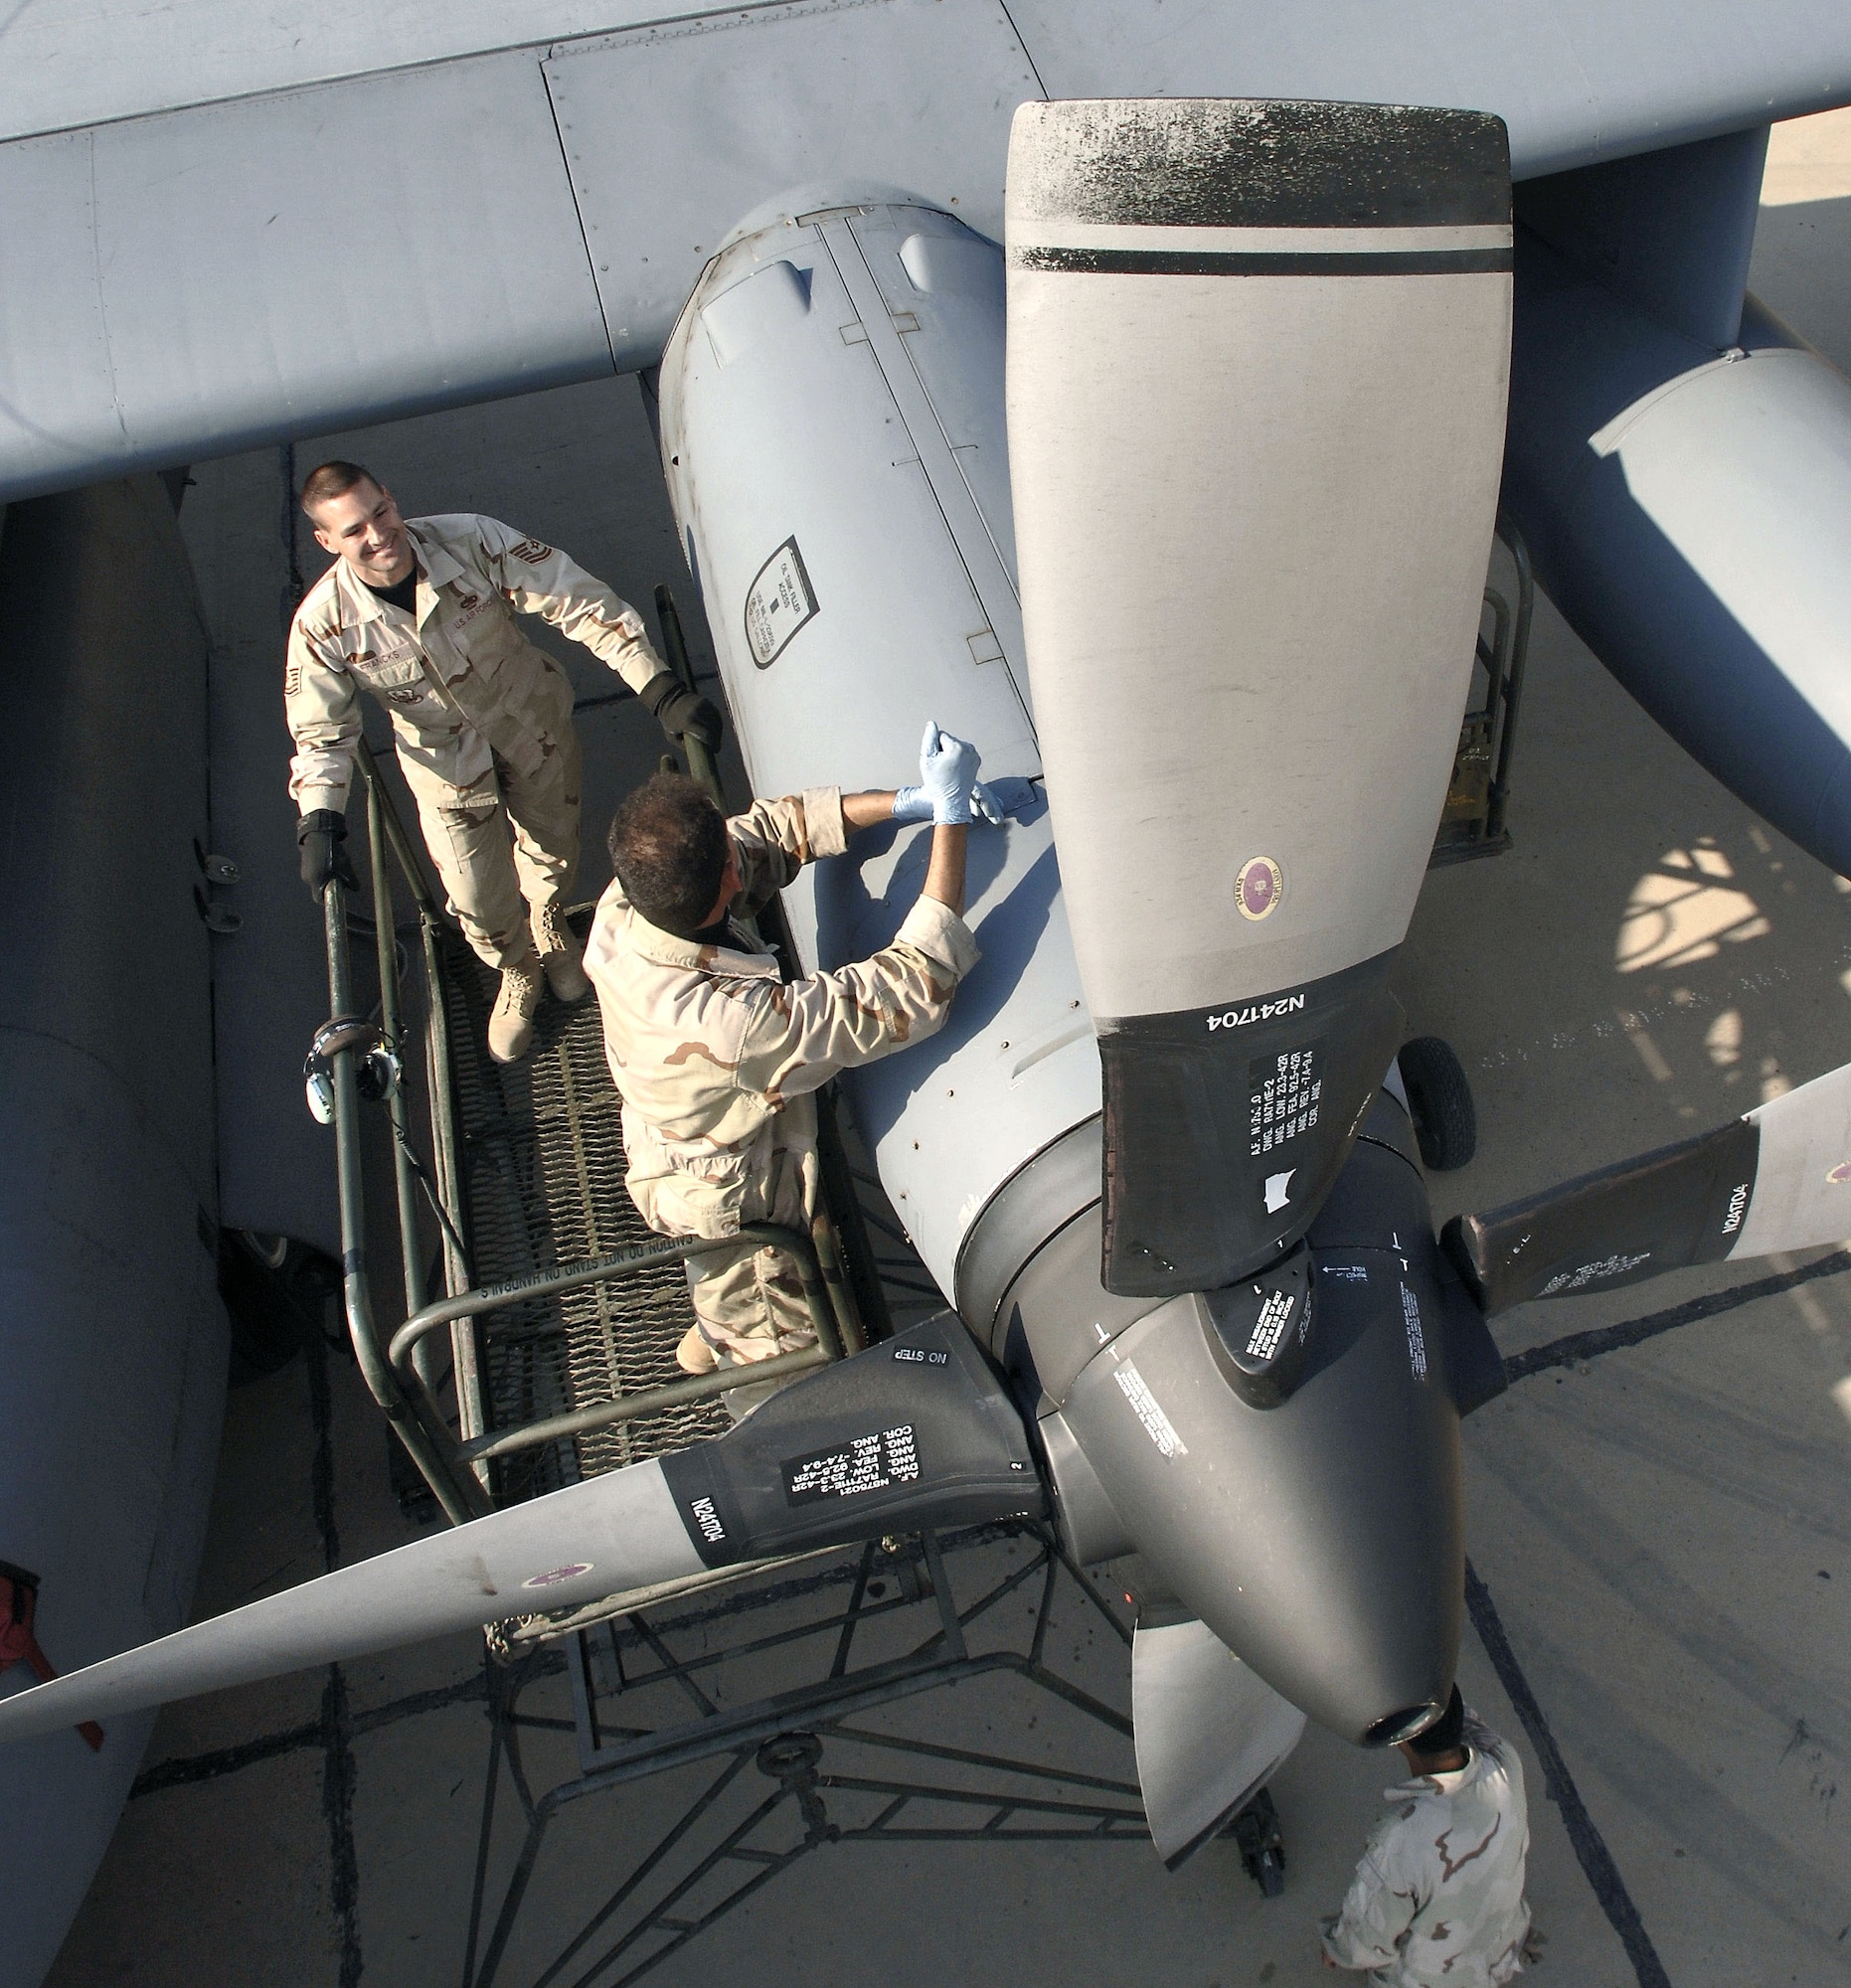 Tech. Sgt. Charles Franks observes and instructs an Iraqi crew chief performing an inspection on the propeller of an Iraqi C-130E Hercules cargo aircraft at New Al Muthana Air Base, Iraq, Wednesday, Feb. 22, 2006. Sergeant Franks is part of the Multinational Security Transition Command-Iraq, Coalition Air Force Transition Team. The Iraqi trainee is with the 23rd Squadron. (U.S. Air Force photo/Master Sgt. Lance Cheung)